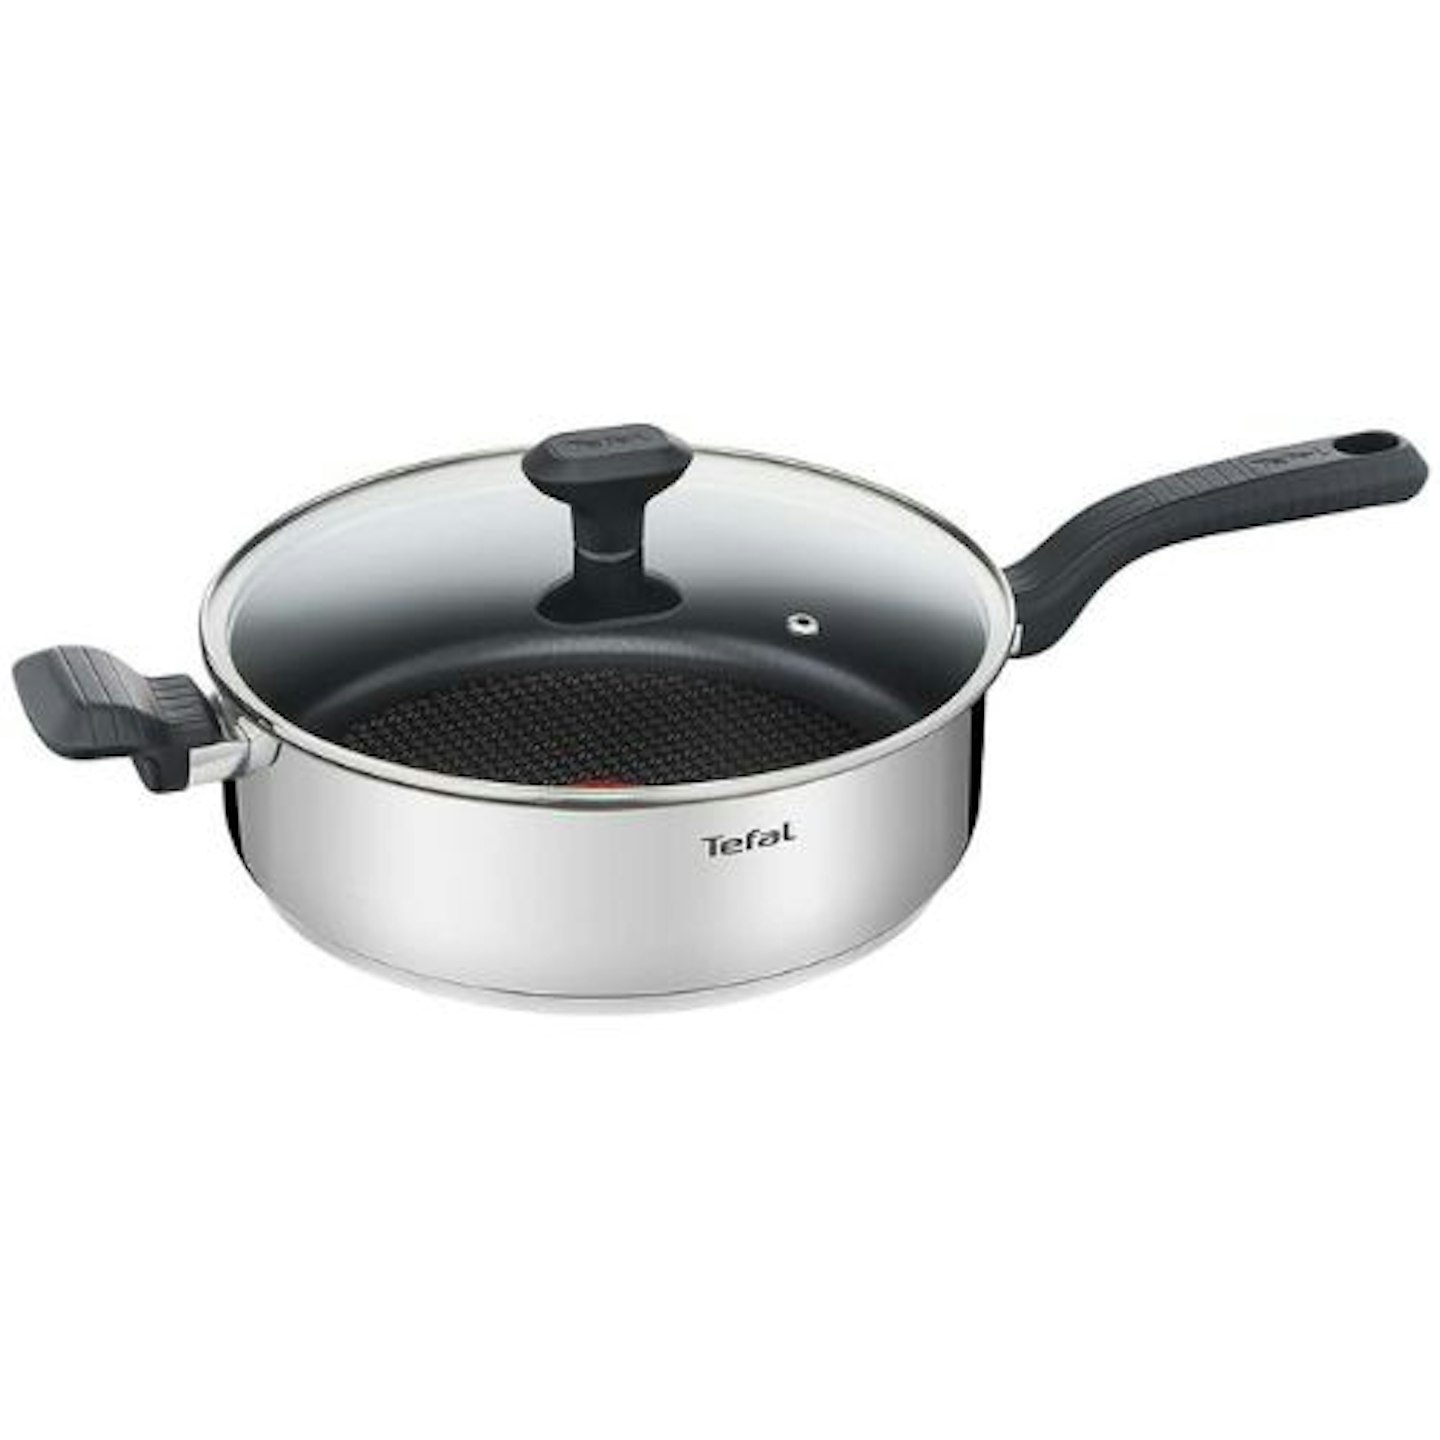 Tefal 26cm Comfort Max Stainless Steel Non-stick Saute Pan and Lid